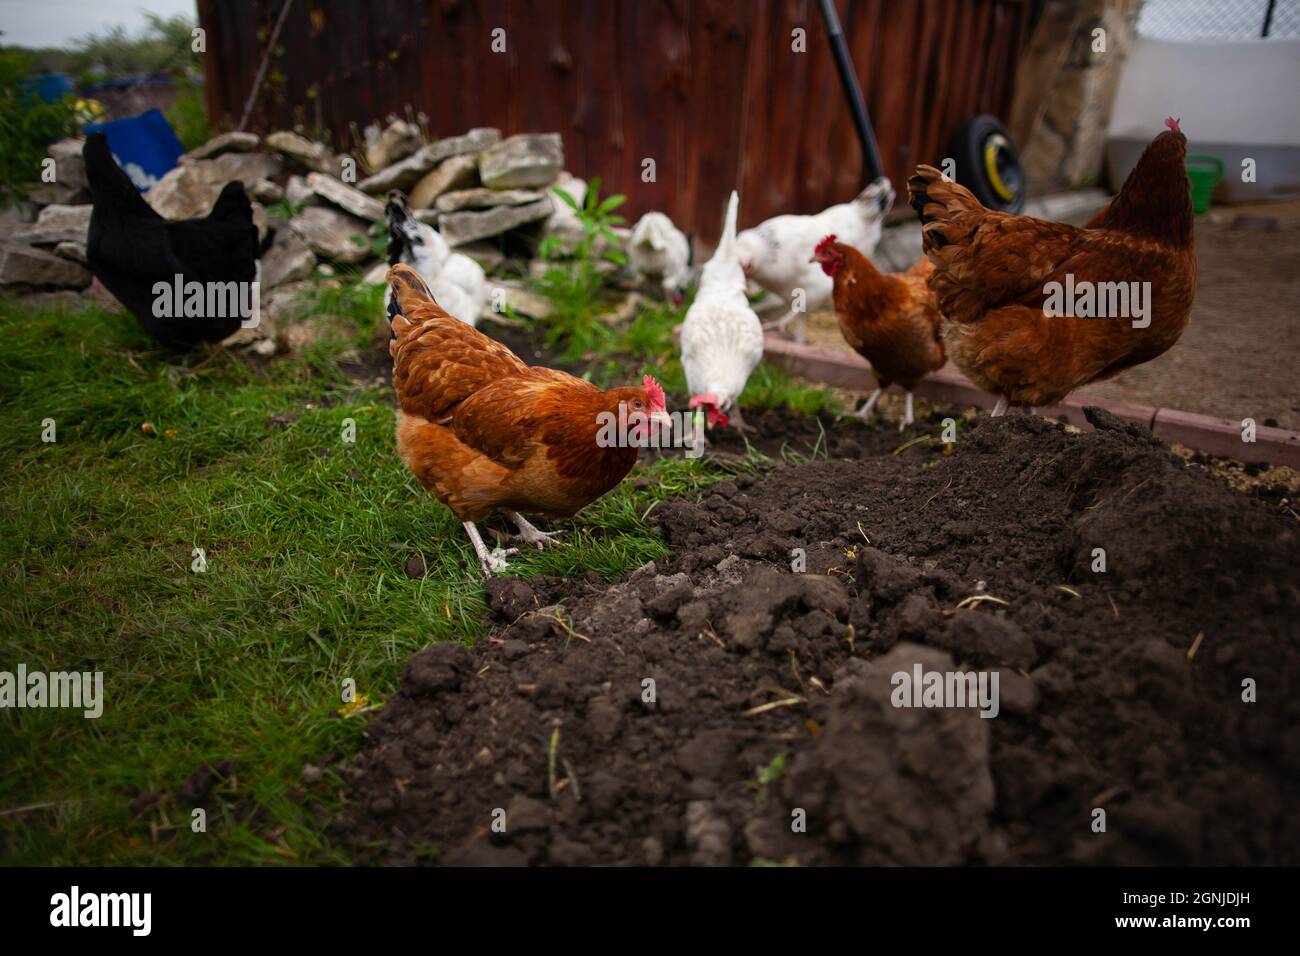 Close photo of pack of chickens feeding on the ground, looking for something with some tools, wooden buildings and stones in the background Stock Photo